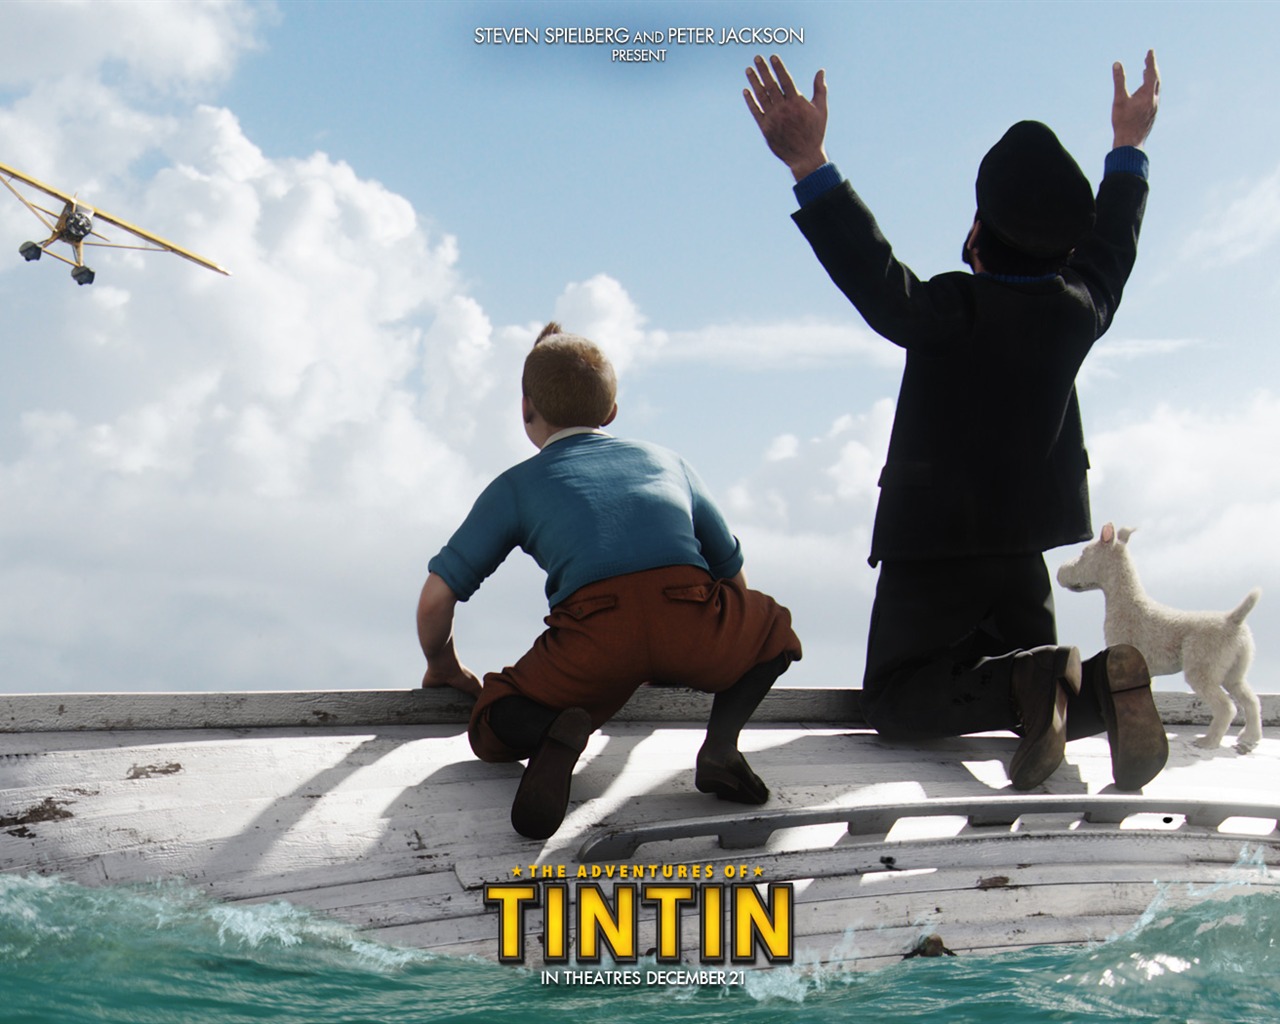 The Adventures of Tintin HD wallpapers #7 - 1280x1024